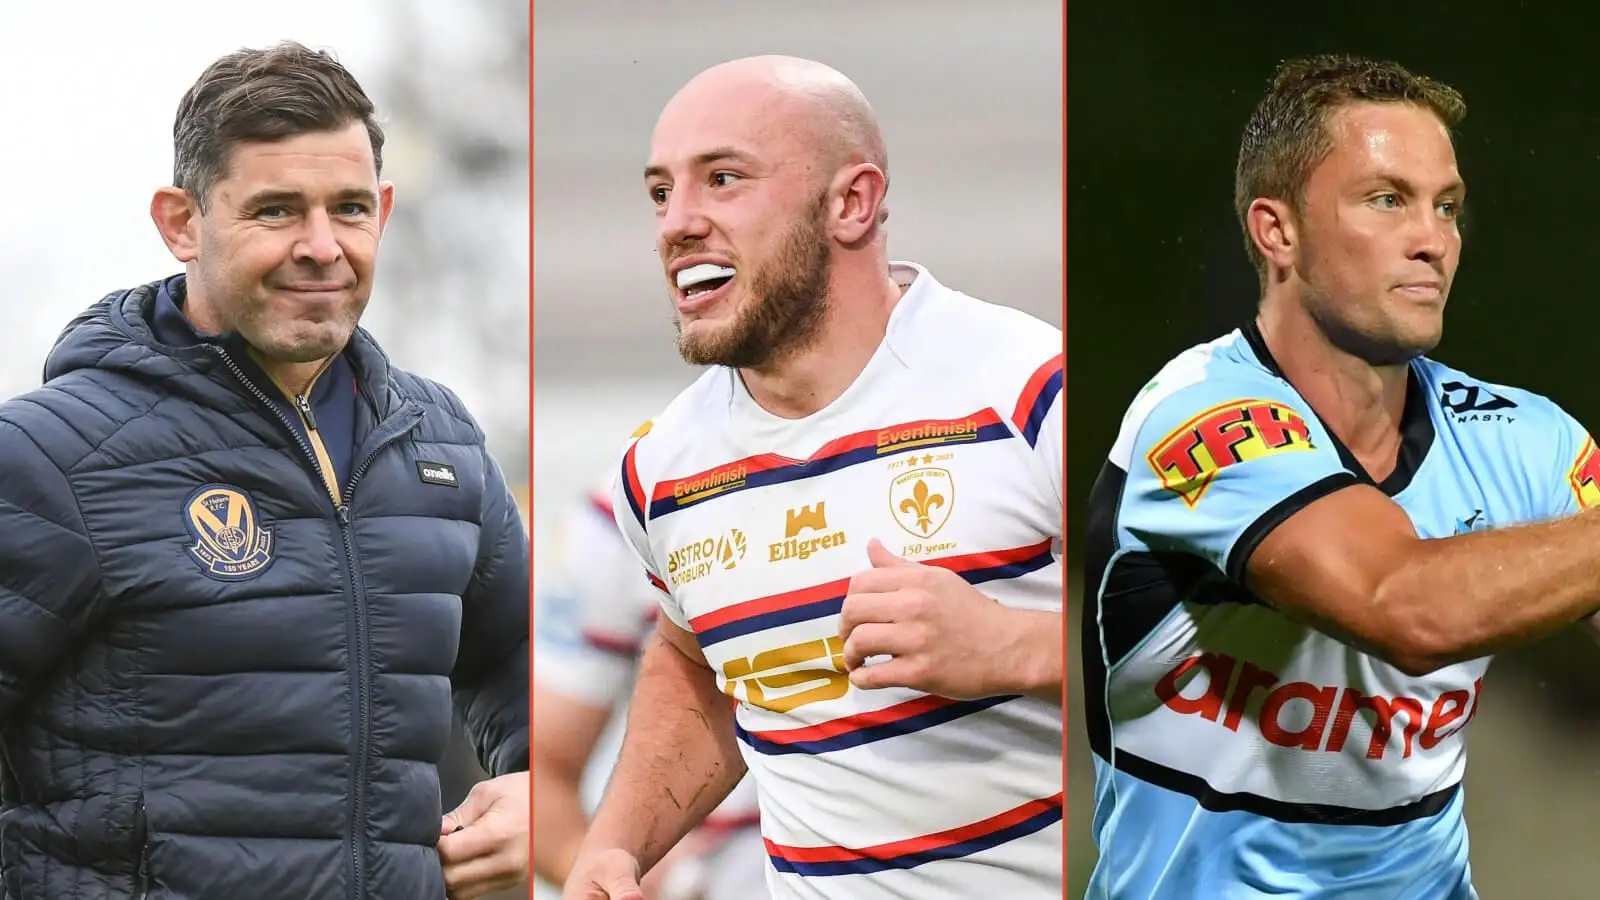 Super League transfer Q&A: St Helens relaxed on Hopoate replacement, Leeds’ Kershaw interest, Leigh recruitment plans, more Salford incomings?